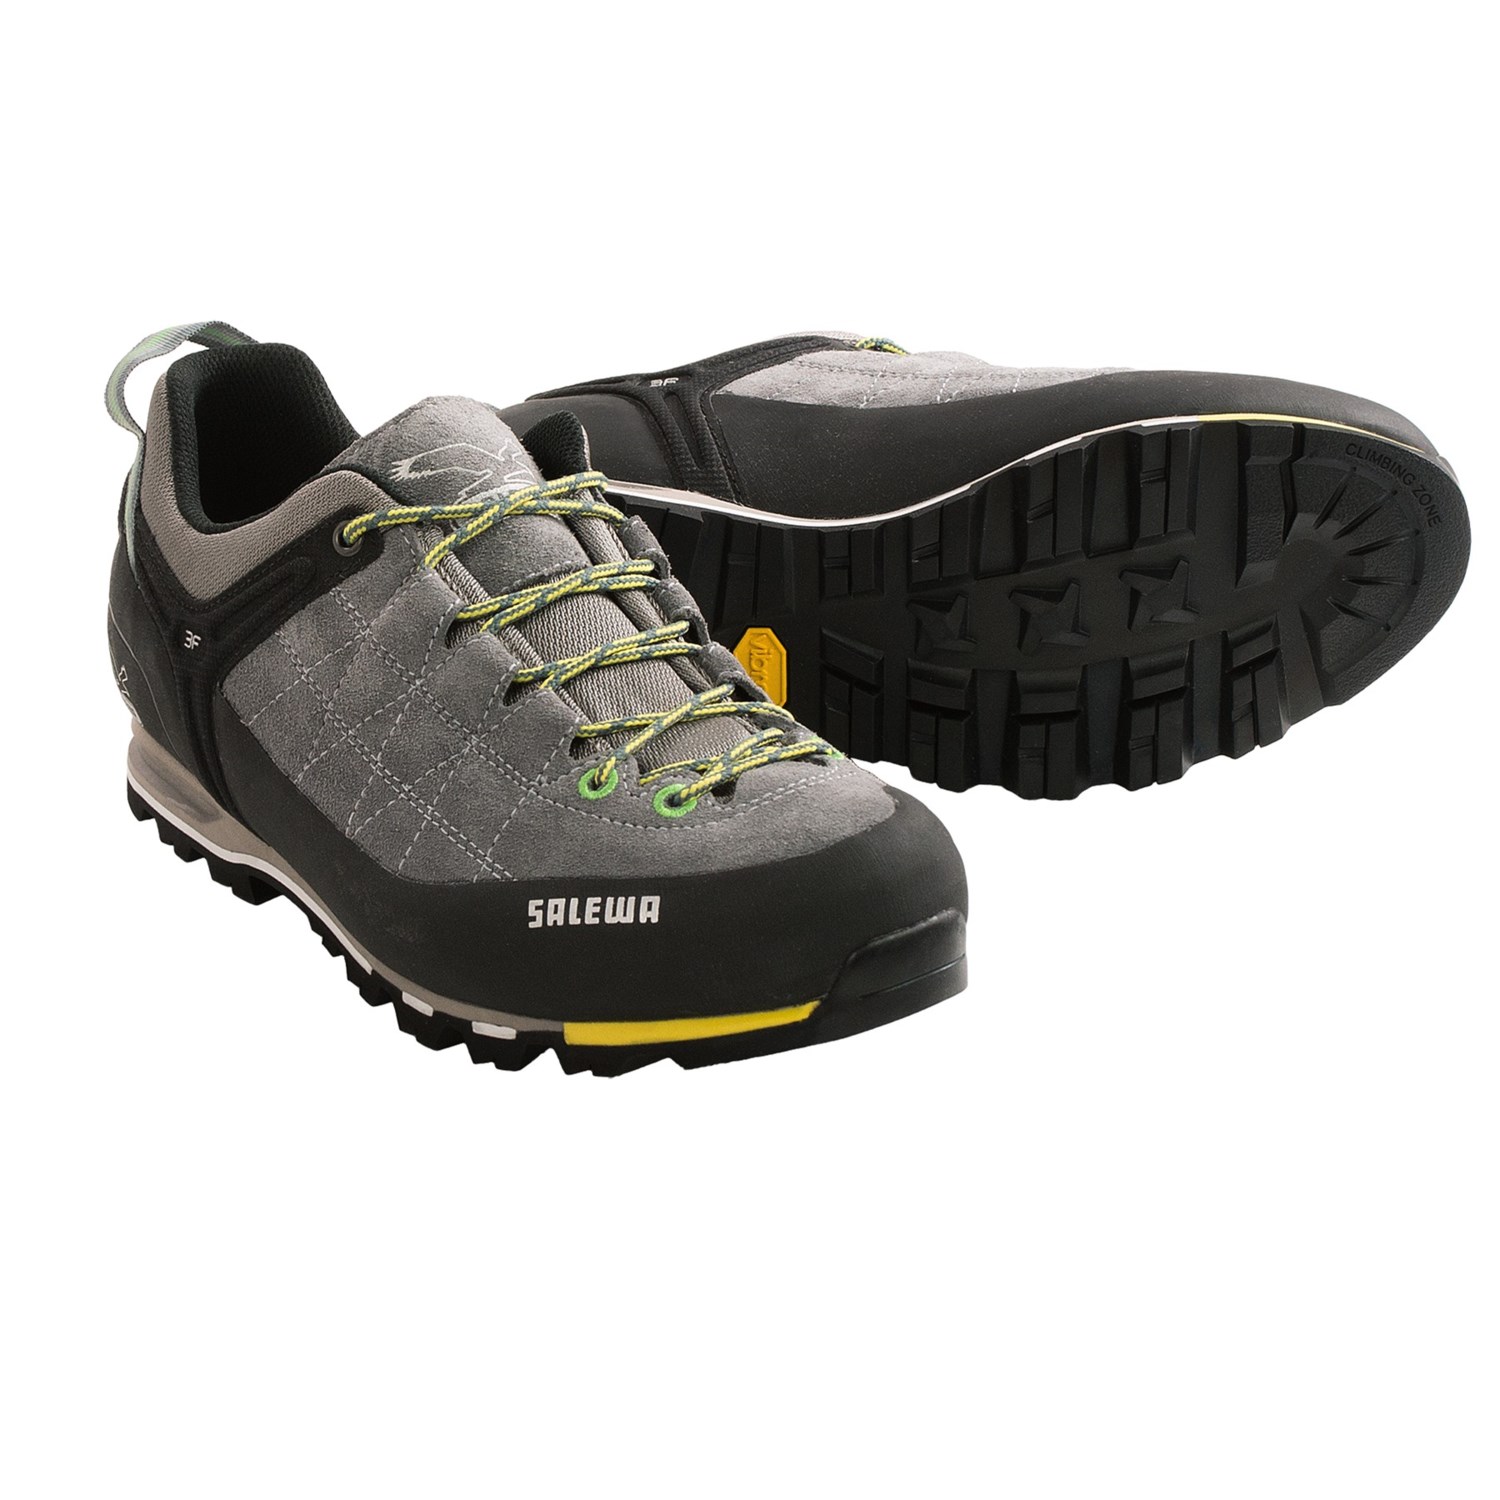 Salewa Mountain Trainer Hiking Shoes (For Men) - Save 26%